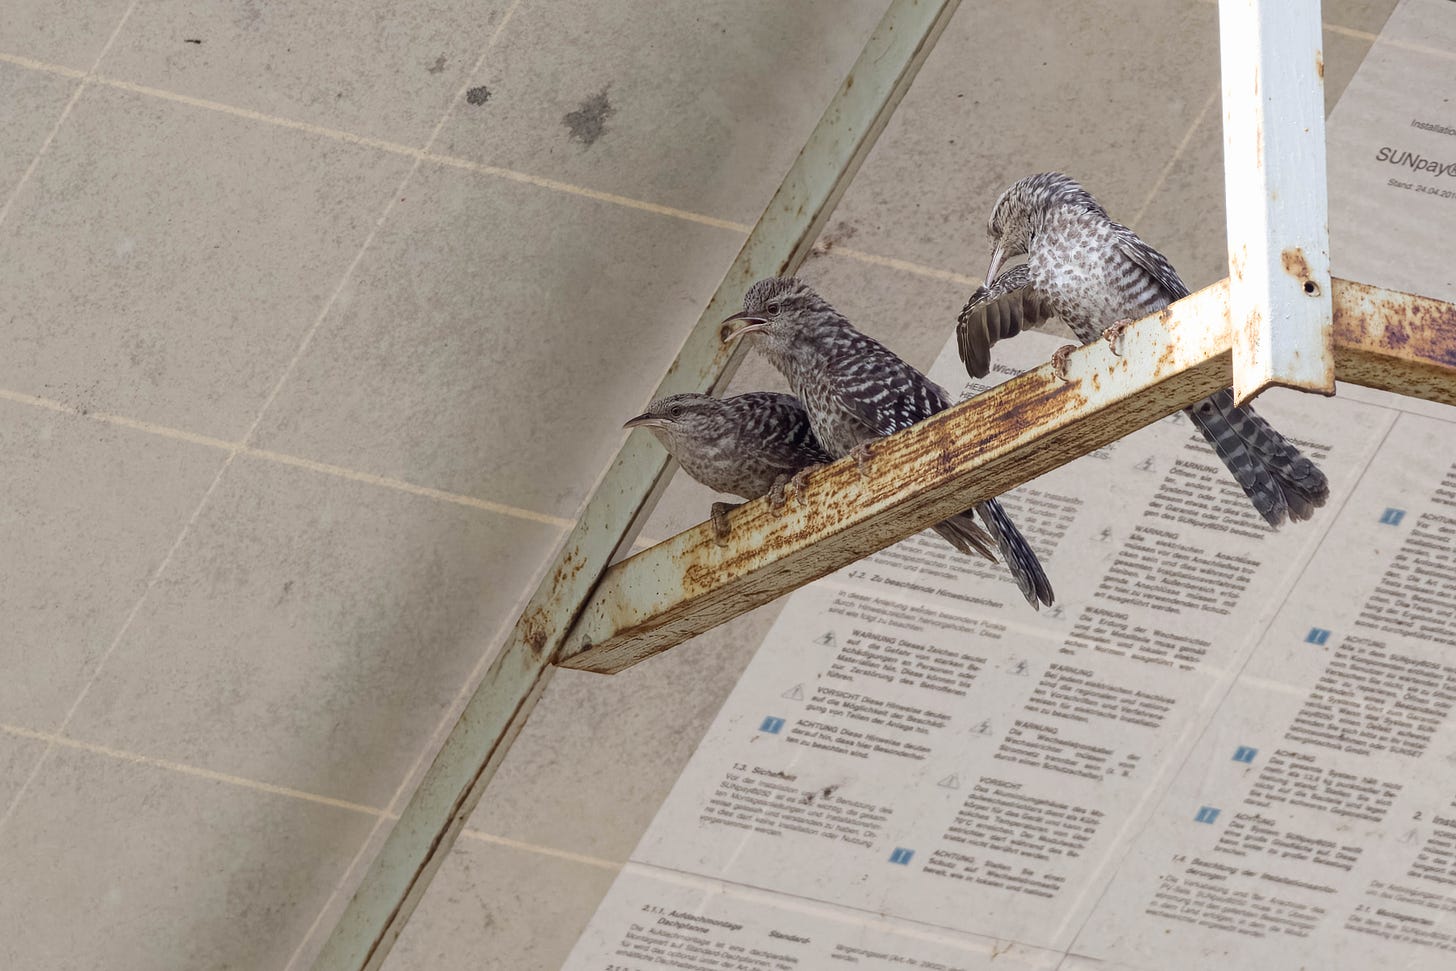 three wrens perched in the shade of a solar panel on a rusty piece of square bar, the leftmost wren is leaning forward. the middle wren is standing upwright with its mouth open. the rightmost wren is preening. all of them are brown with pale stripes and a pale eyebrow.